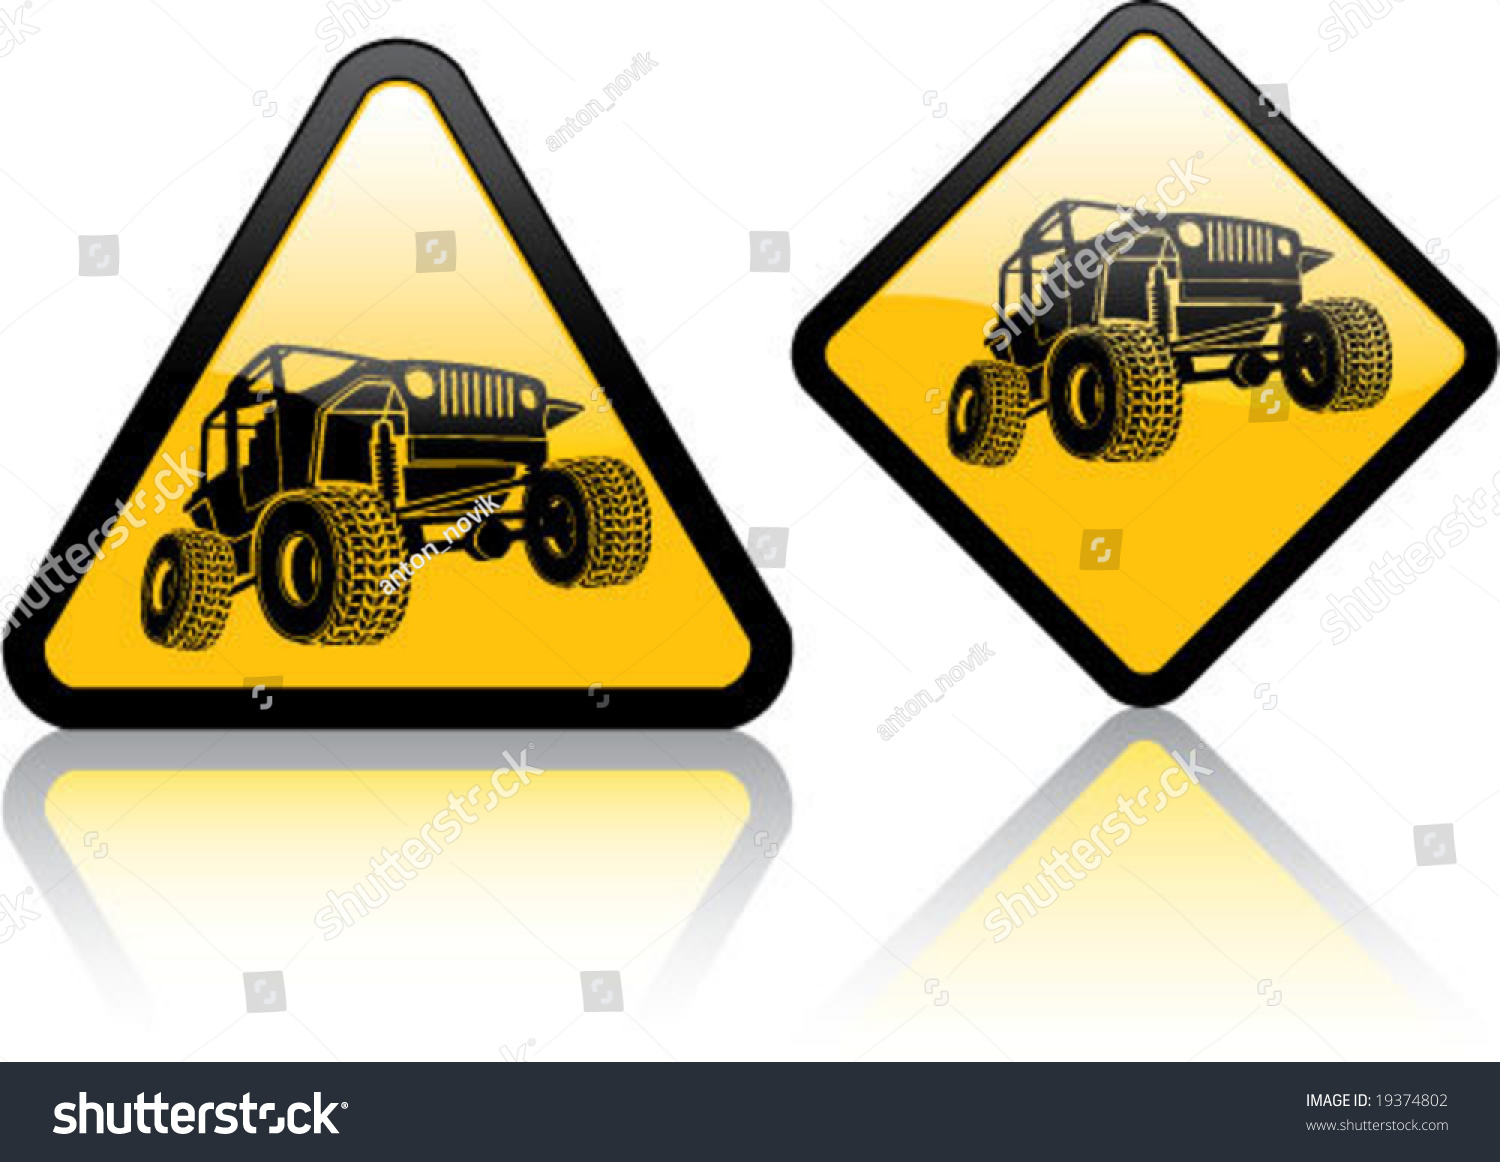 SVG of Attention Jeep / Off-road Vehicle svg